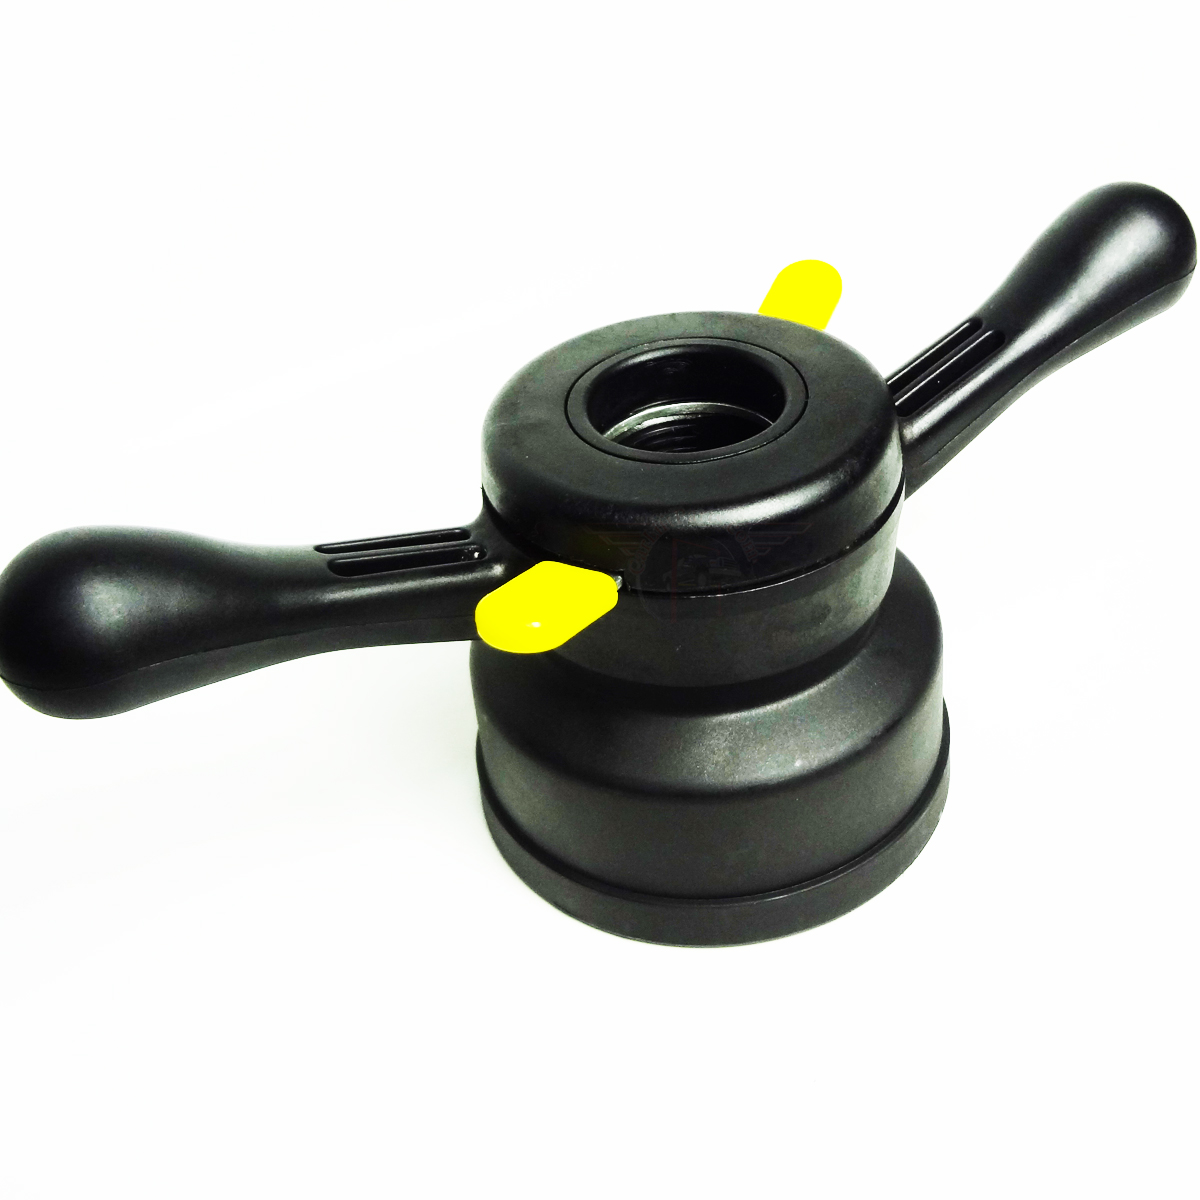 Cuque Tire Wheel Balancer Plastic Quick Release Hub Wing Nut Tire Balancer Tire Replacement Tool for Ranger Launch Wheel Balancer Plastic Classic Black Diameter 40mm Pitch 4mm